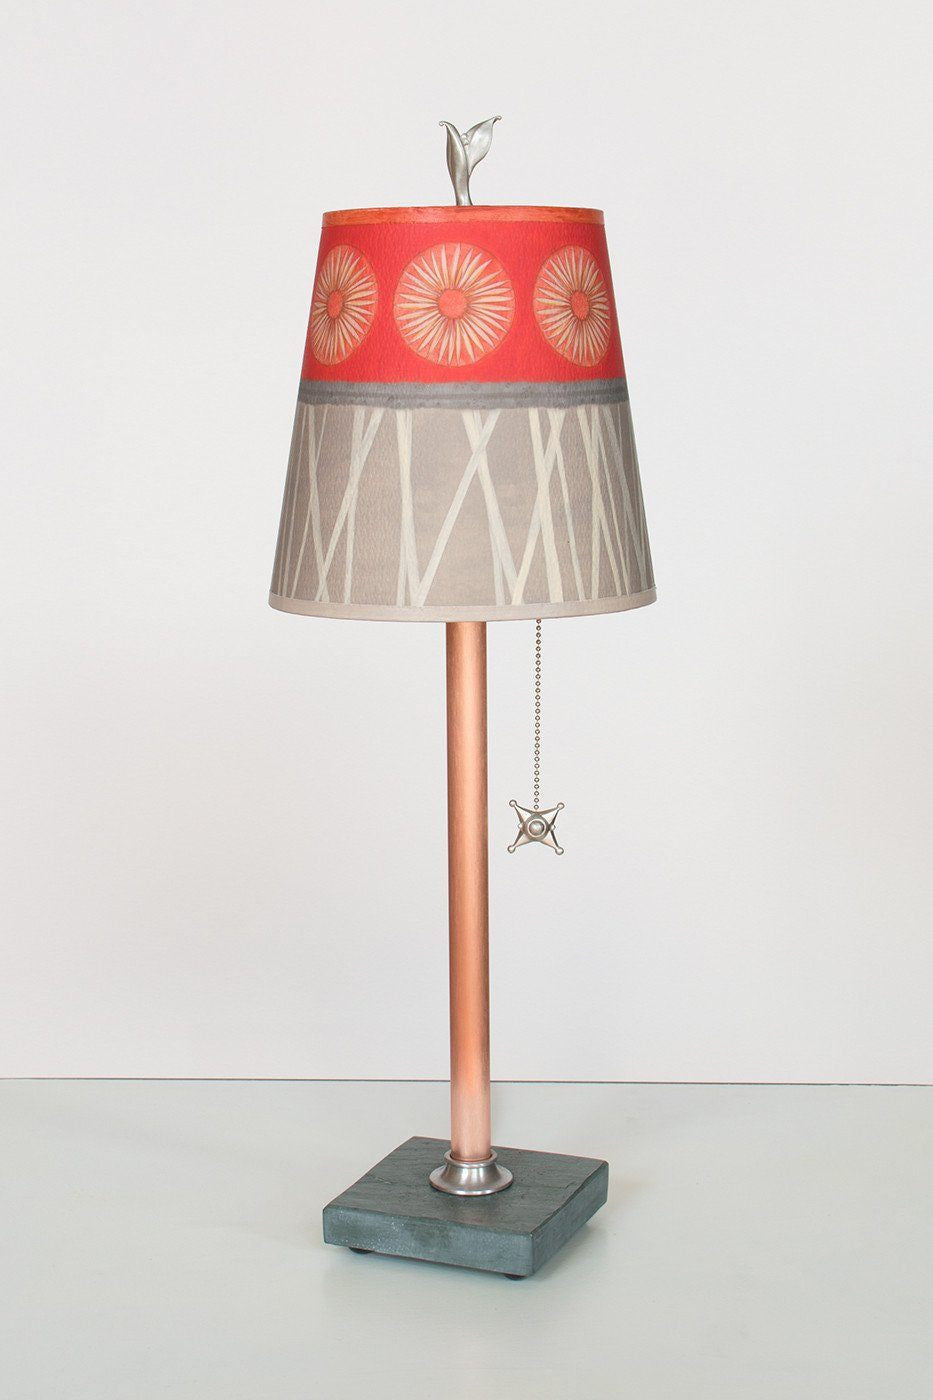 Janna Ugone & Co Table Lamps Copper Table Lamp with Small Drum Shade in Tang